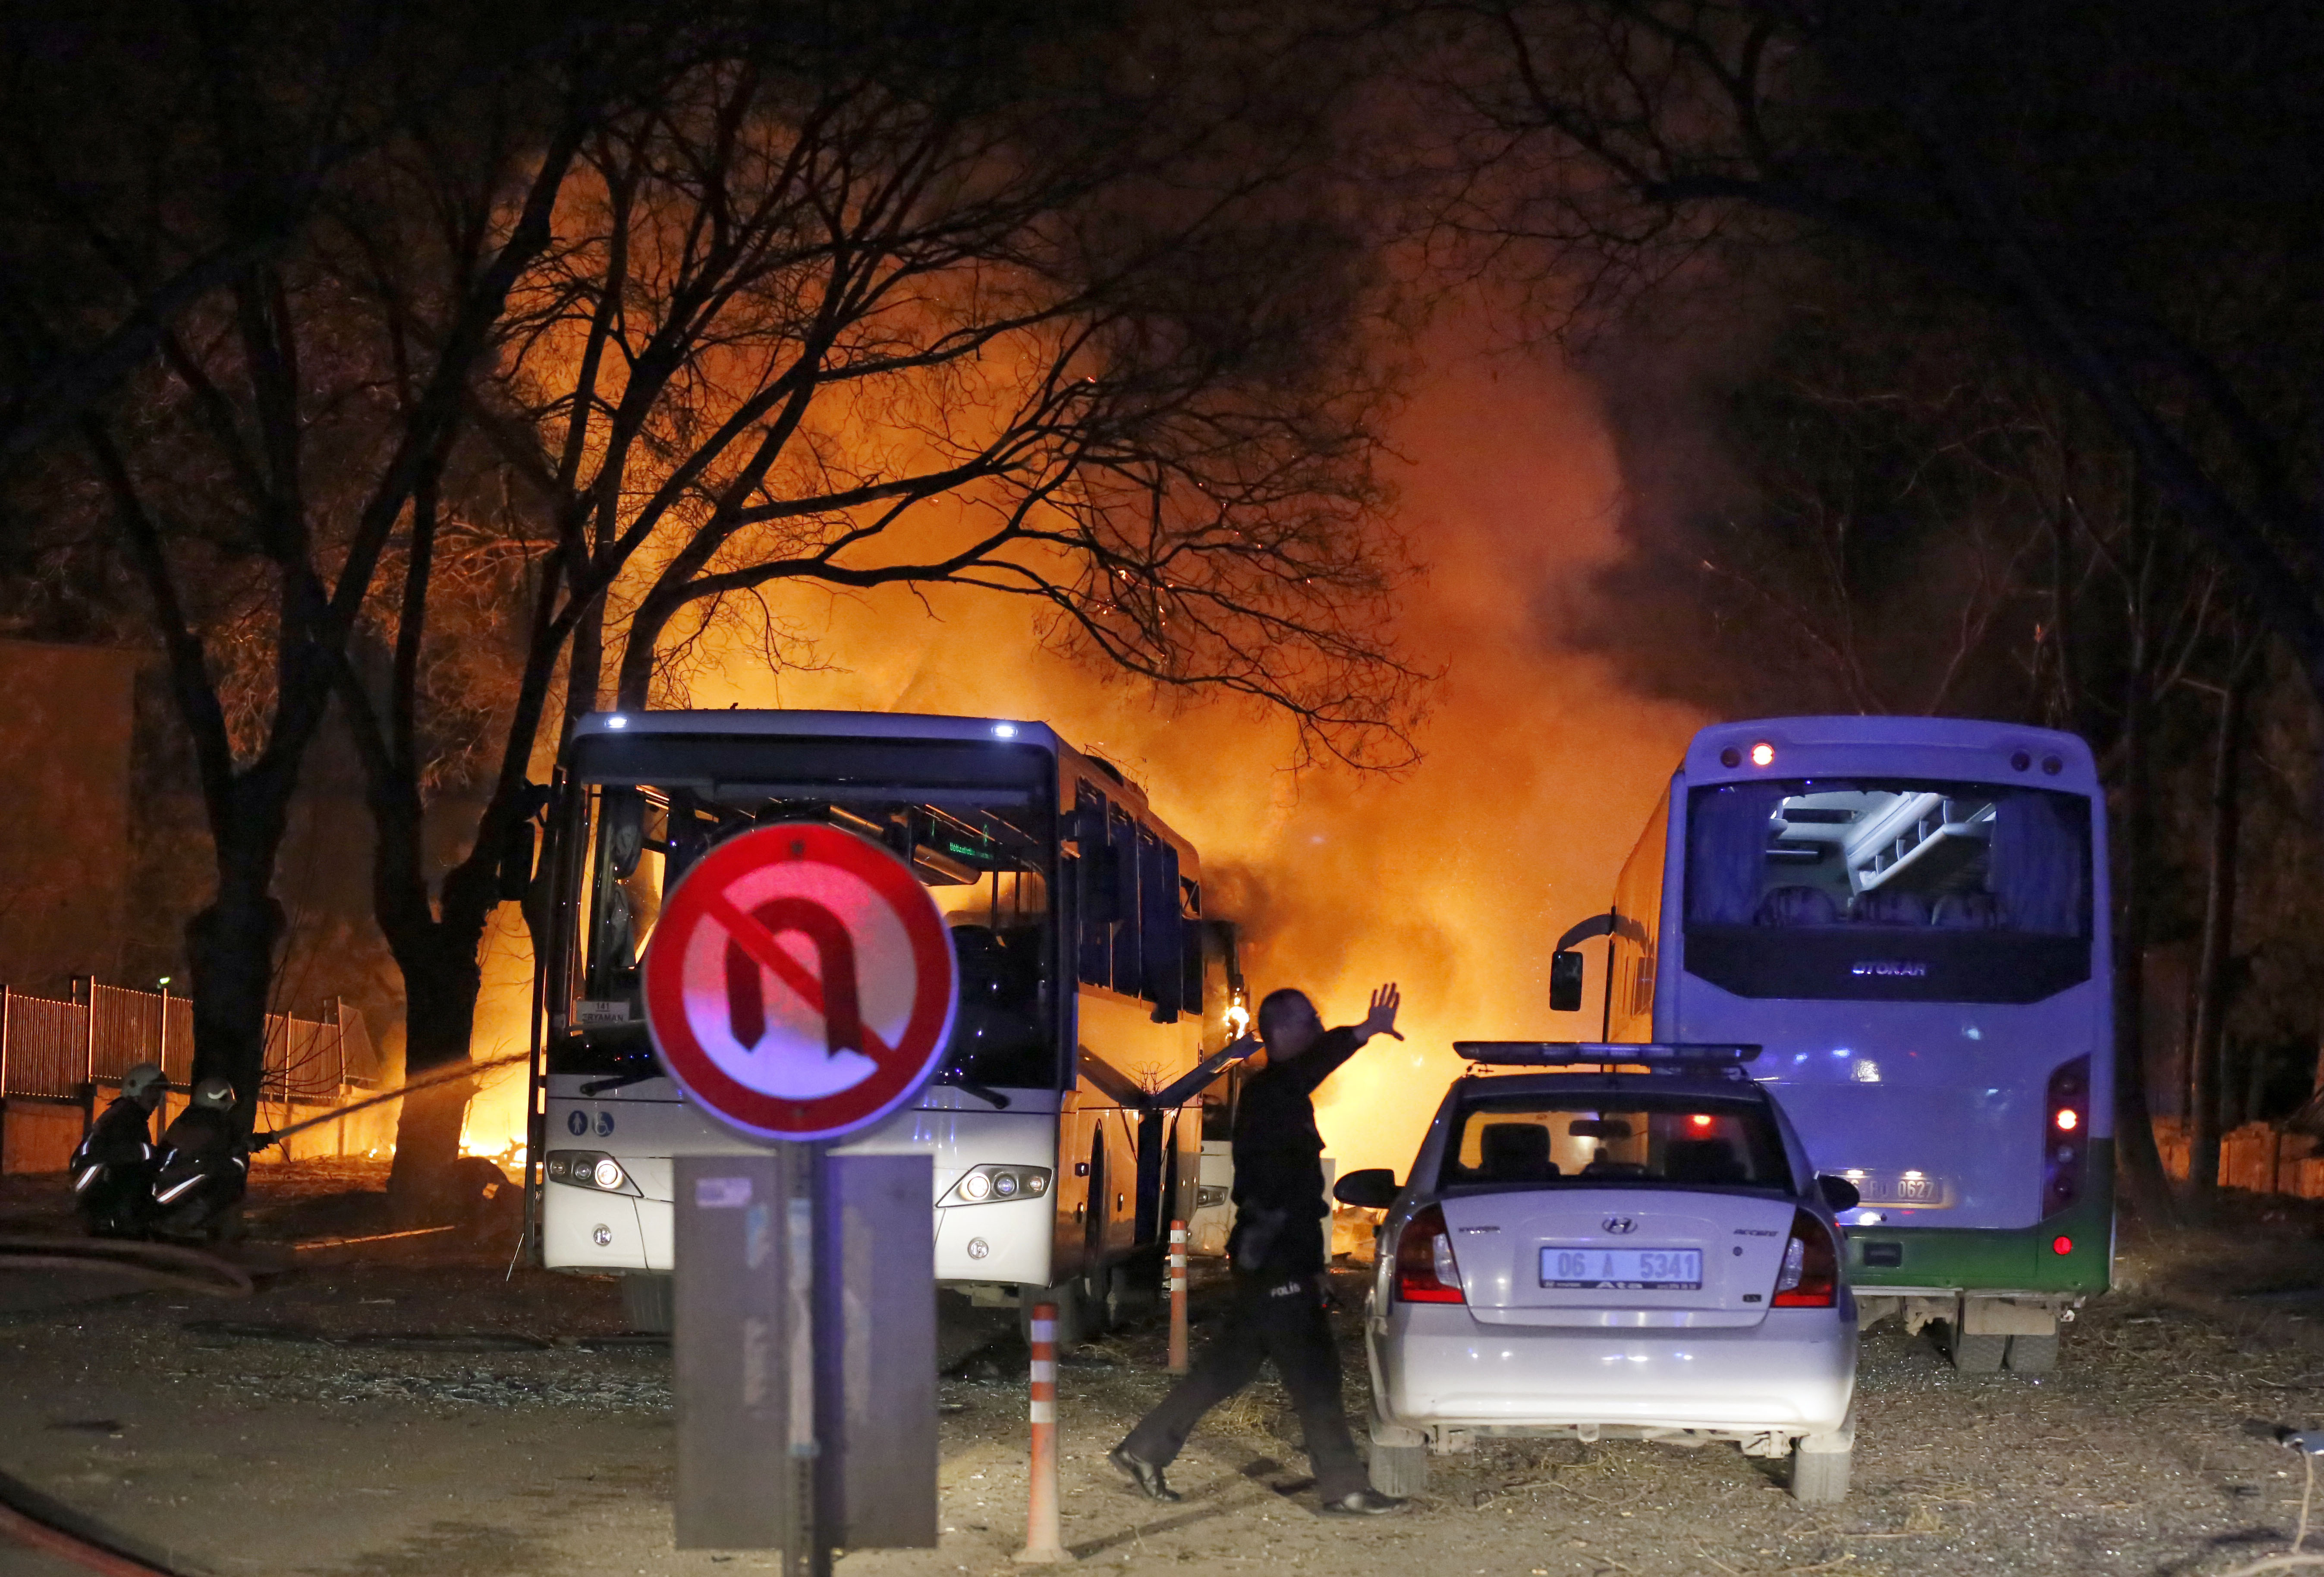 Галерея: A police officer clears the area of an explosion in Ankara, Wednesday, Feb. 17, 2016, after assailants exploded a car bomb near vehicles carrying military personnel in the Turkish capital, killing several people and injuring scores of others, officials said. The explosion occurred during evening rush hour in the heart of city, in an area close to where military headquarters and the parliament are located. (Mustafa Kirazli/Cihan News Agency via AP) TURKEY OUT